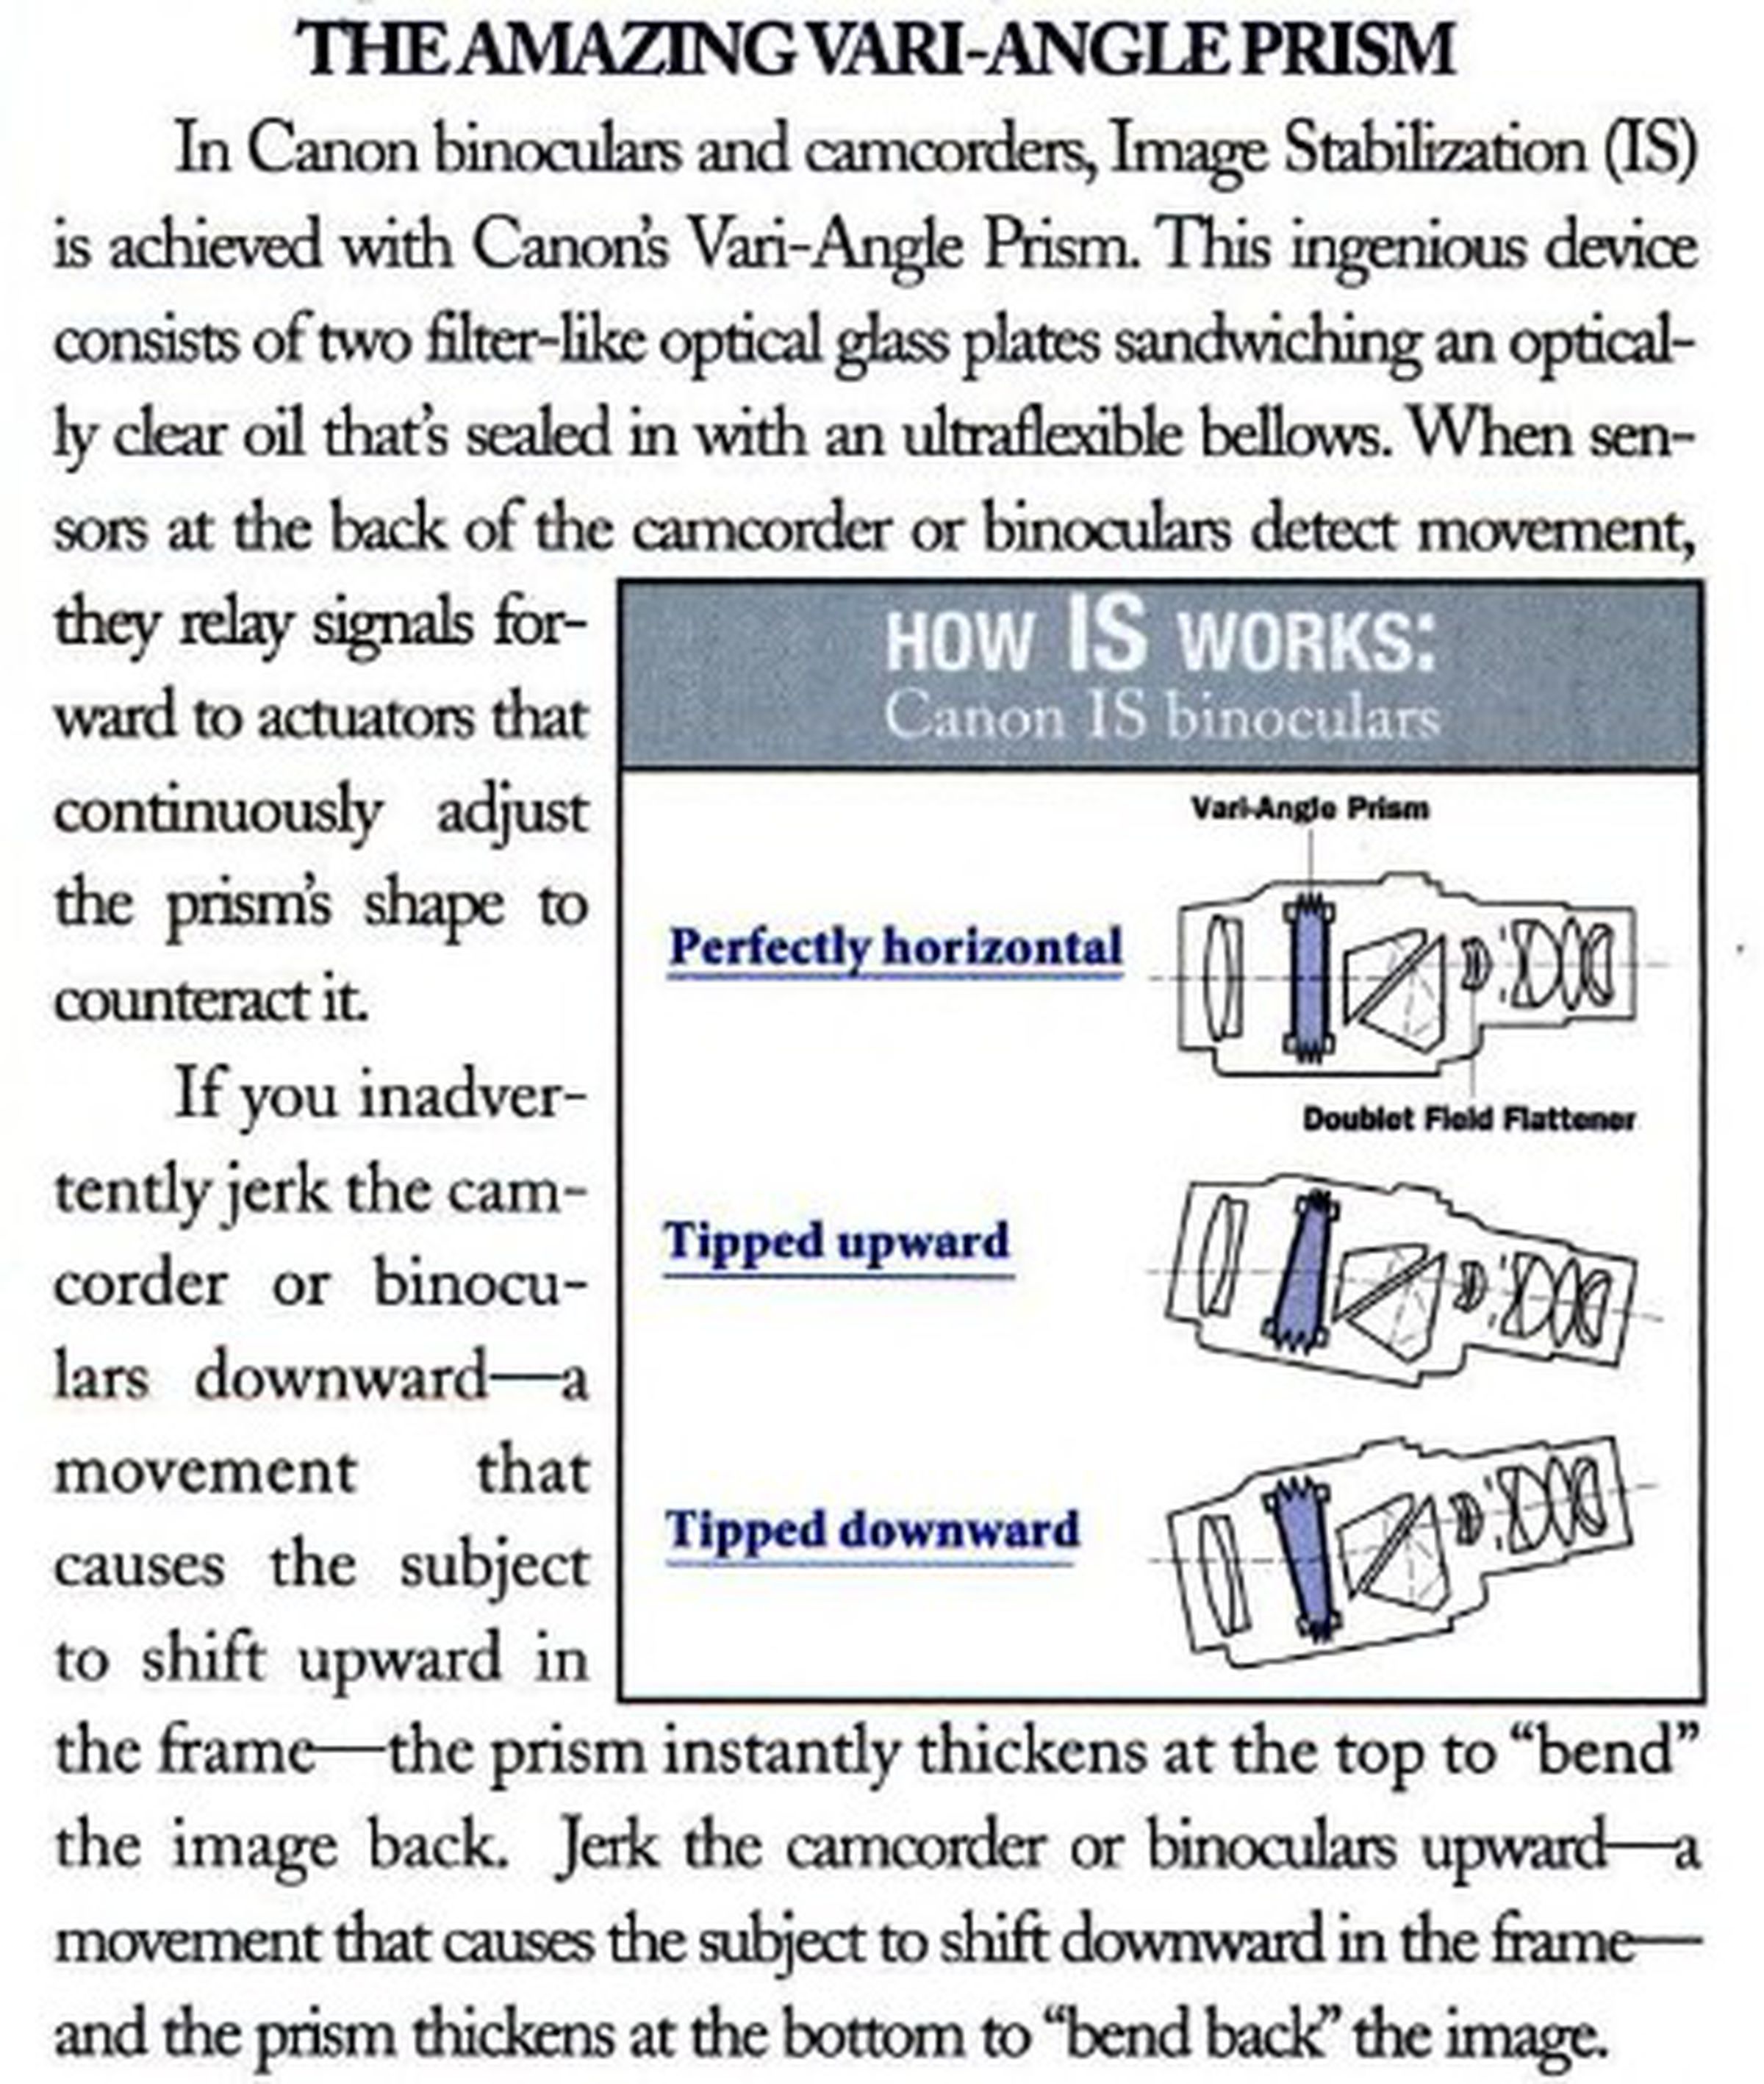 Canon advertisement from 1996 explaining how their binocular image stabilization works.